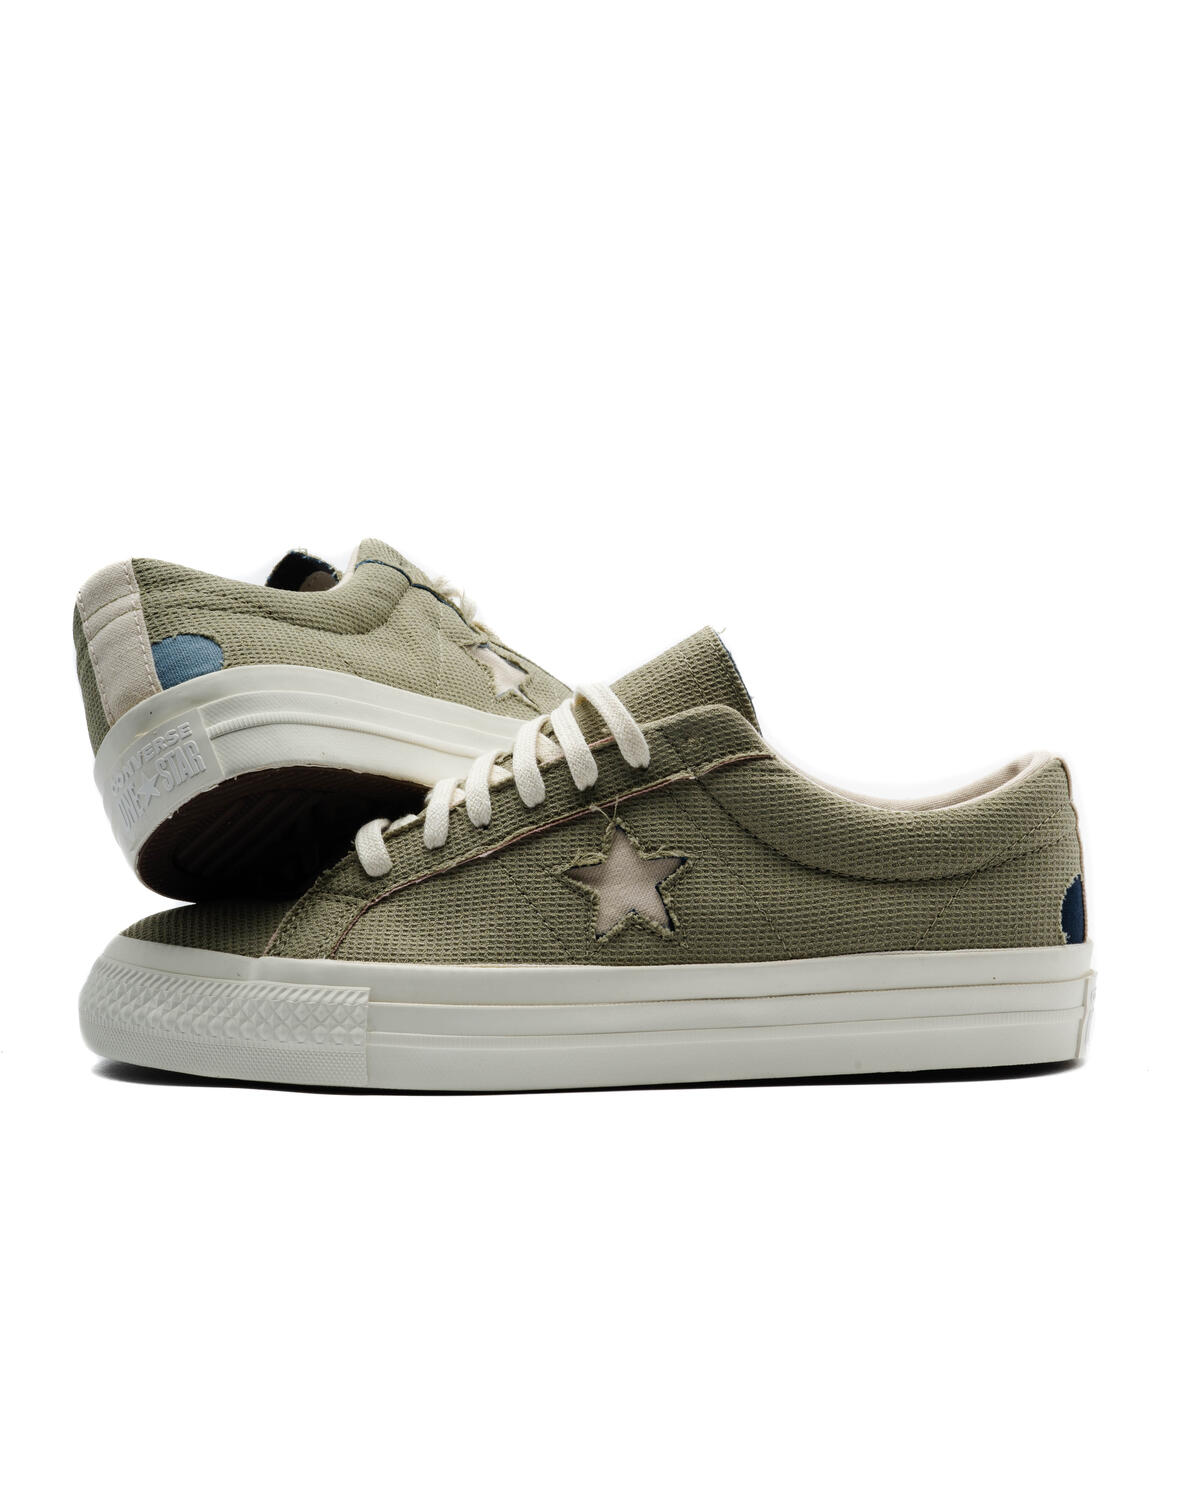 Converse ONE STAR OX | AFEW STORE